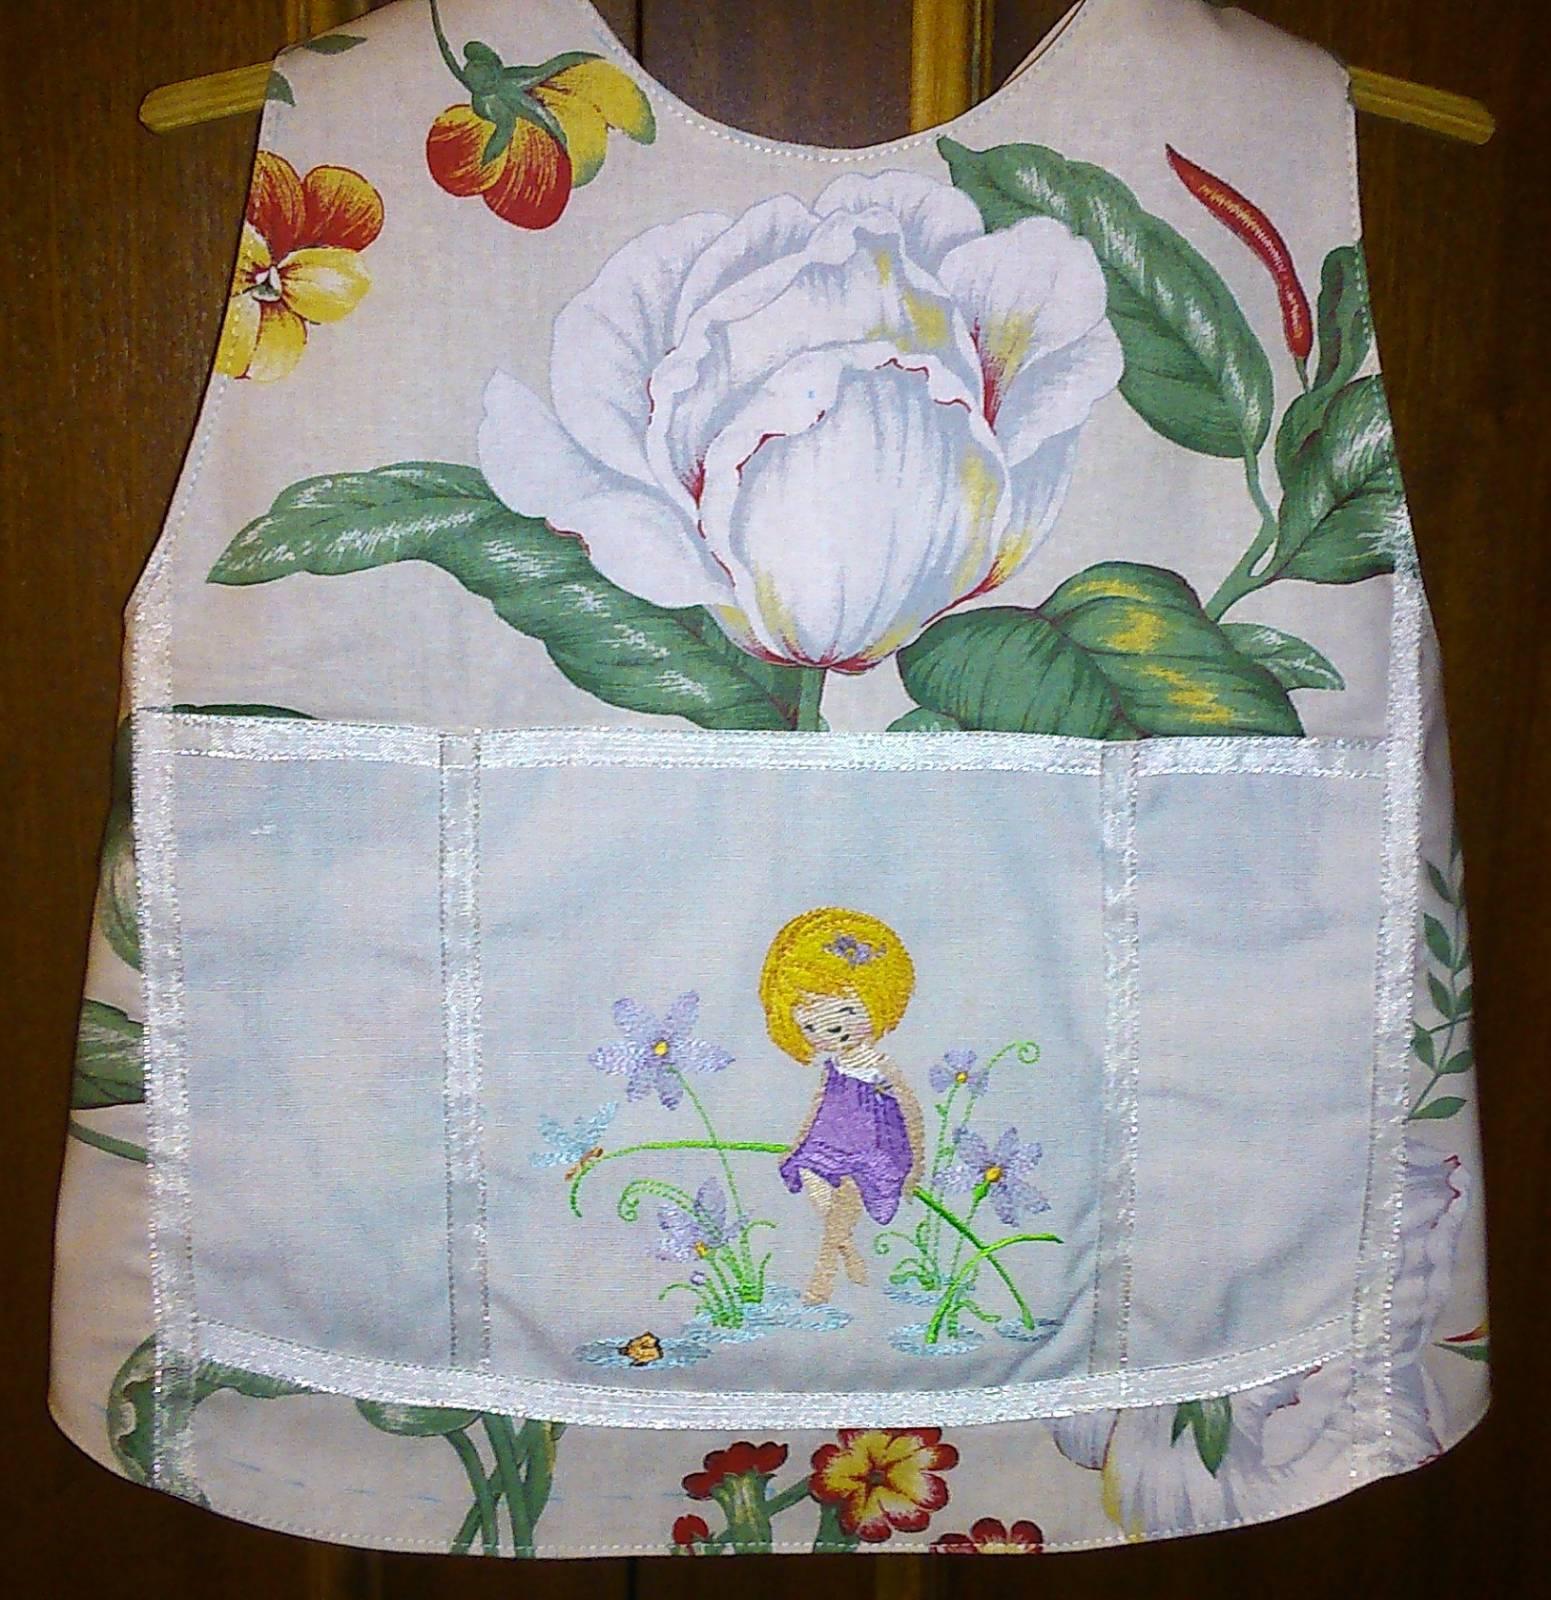 Kitchen apron with Tiny girl embroidery design